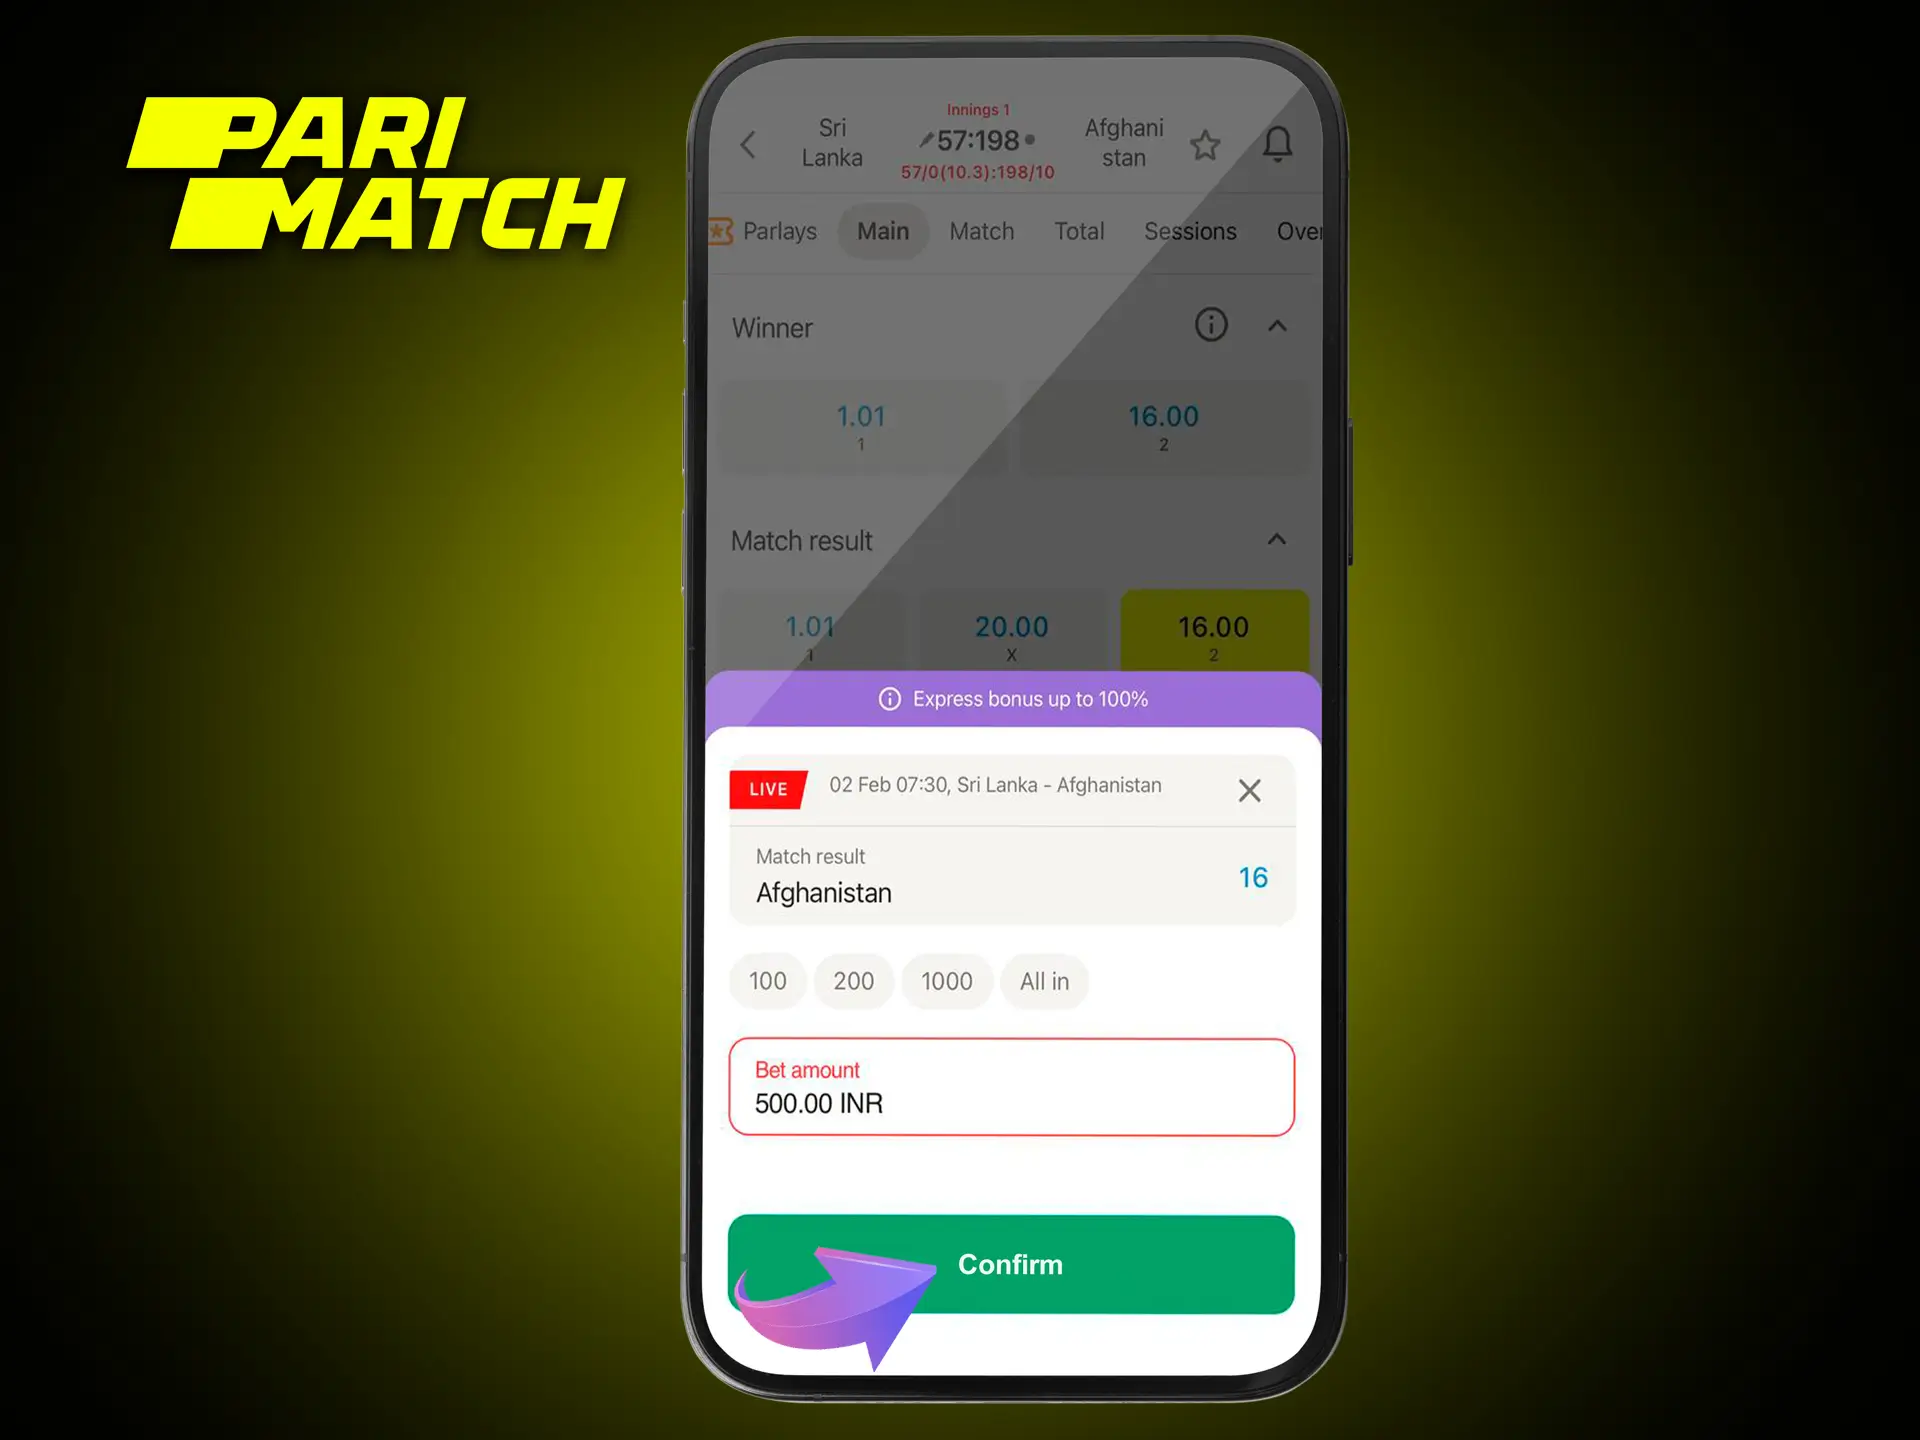 Confirm your choice on the Parimatch website and get unforgettable emotions from winning.